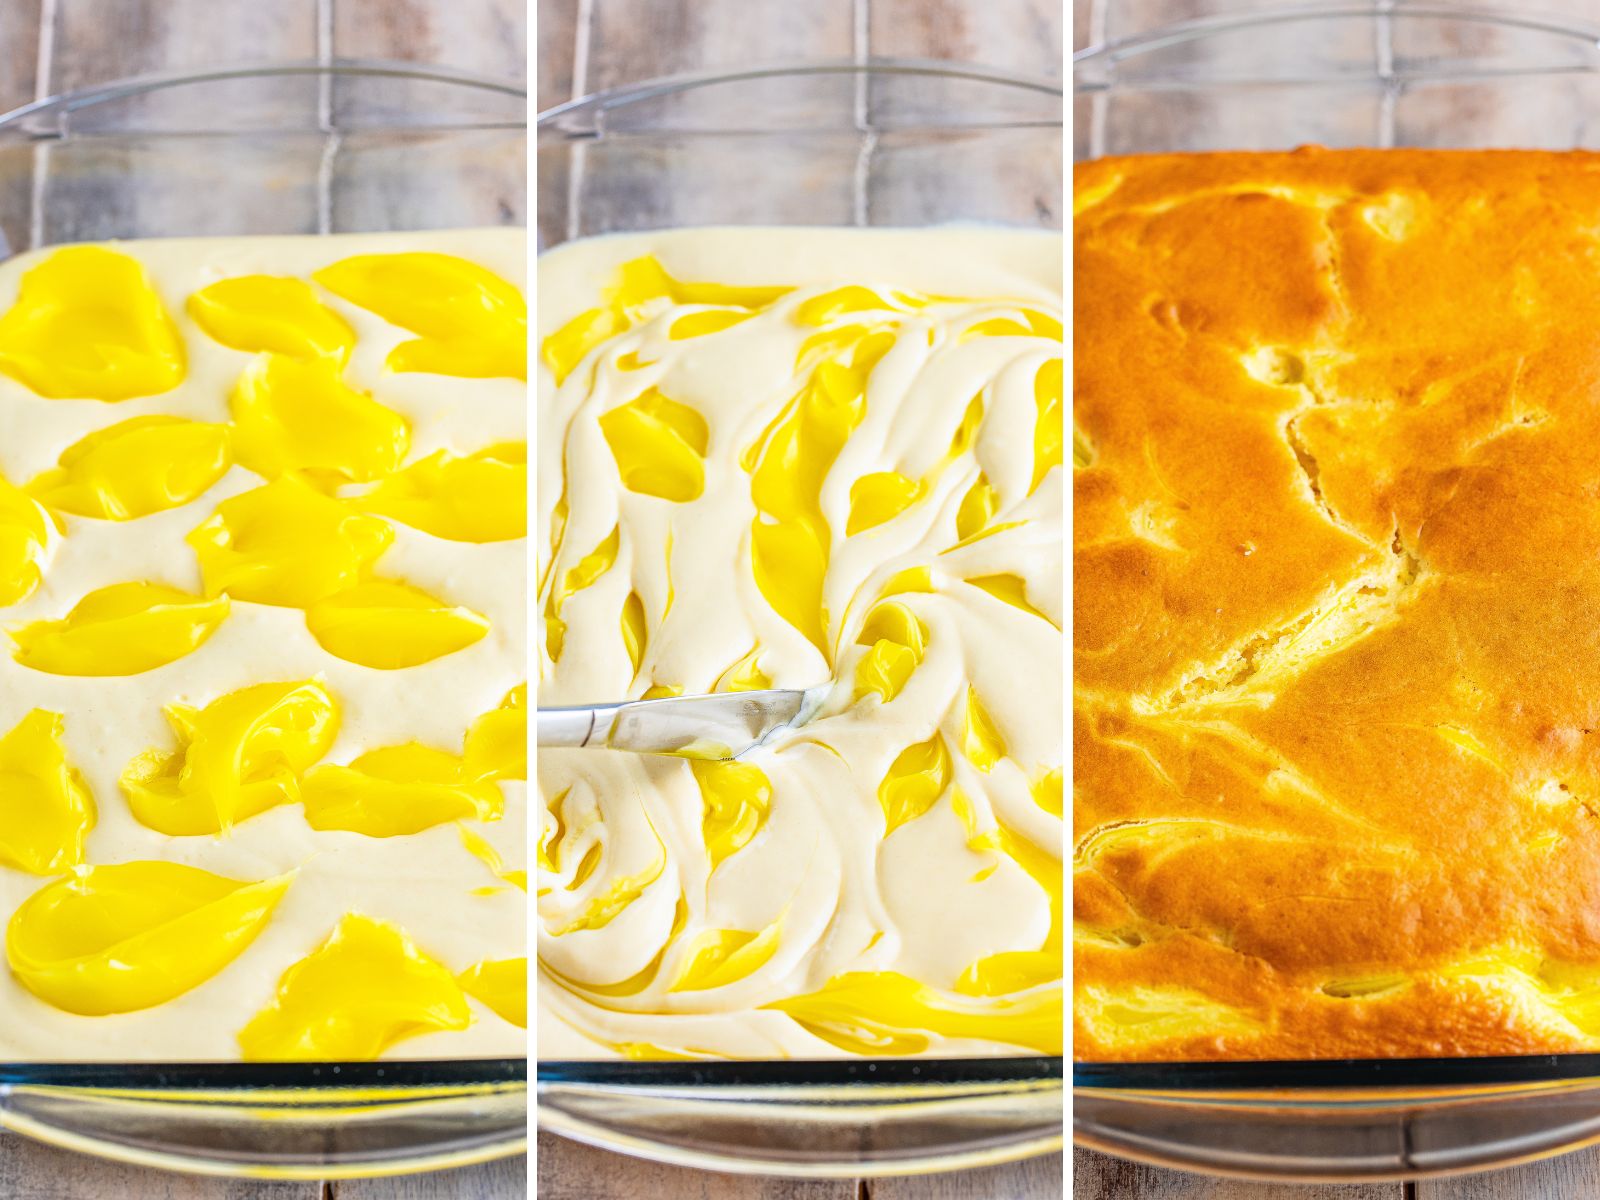 A baking dish with cake mix and lemon curd, then it all swirled and a baking dish with a baked Lemon Cake.